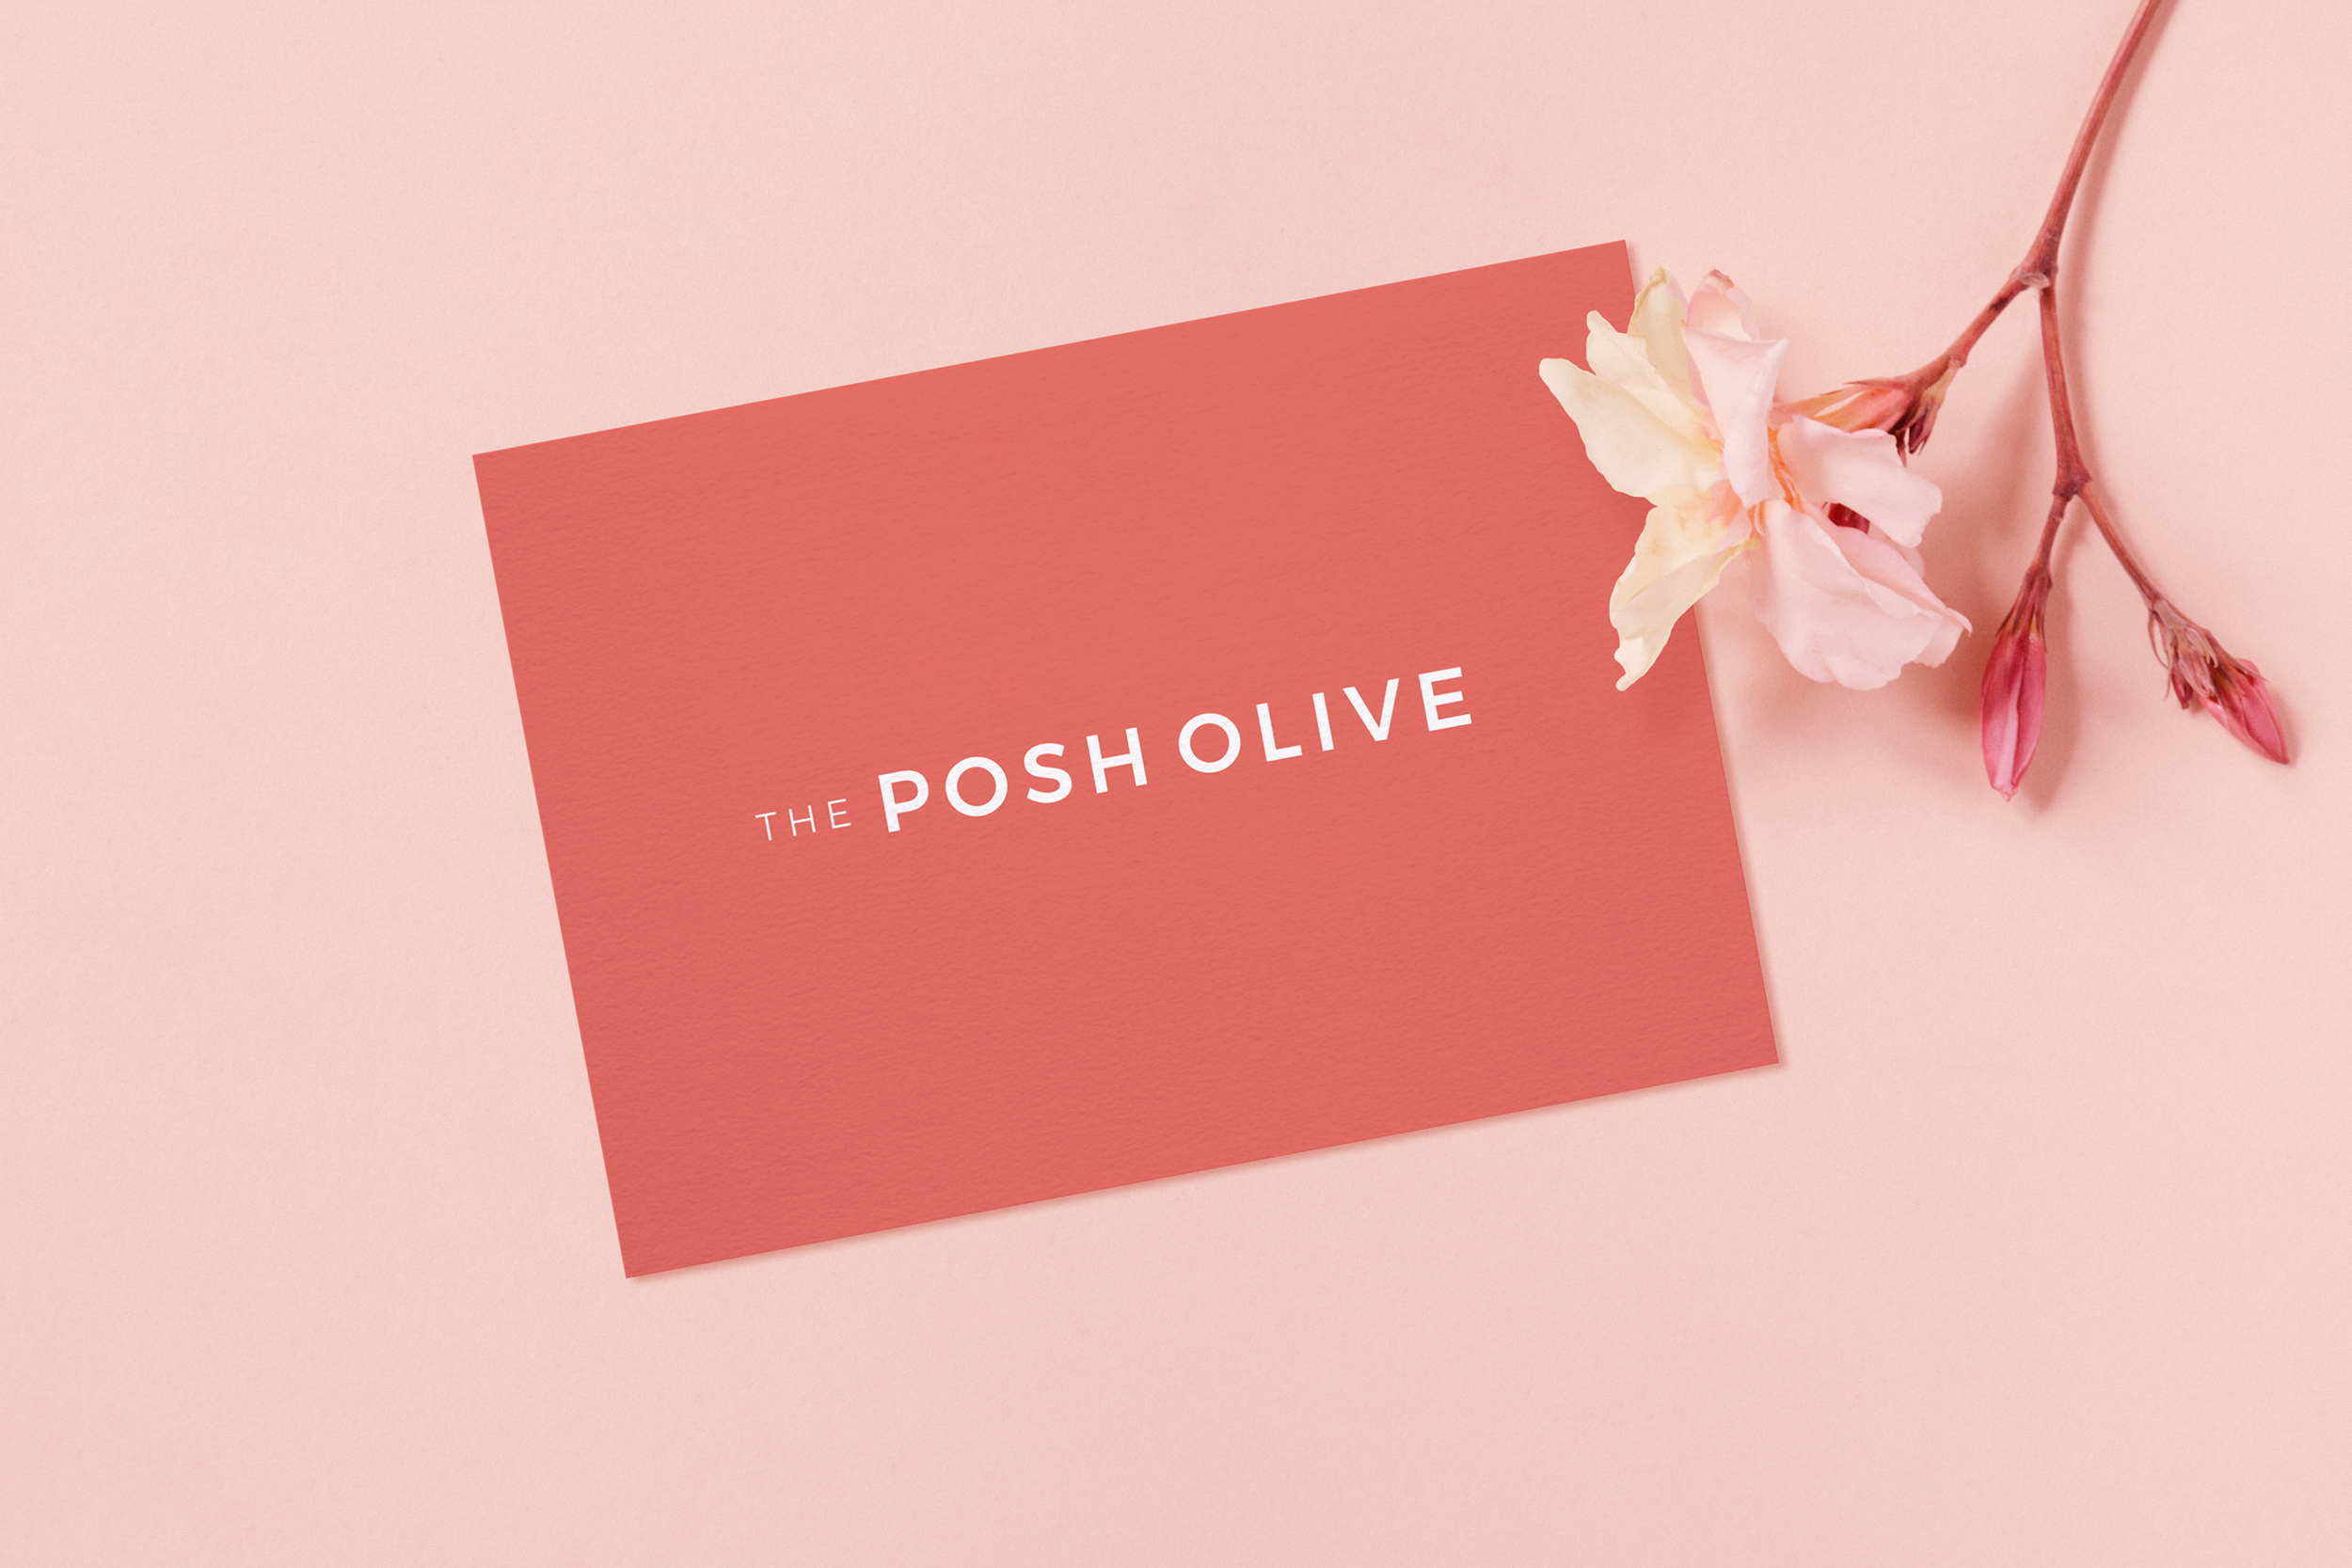 The Posh Olive | Soaps and Bath Products // Brand Design by Sarah Ann Design